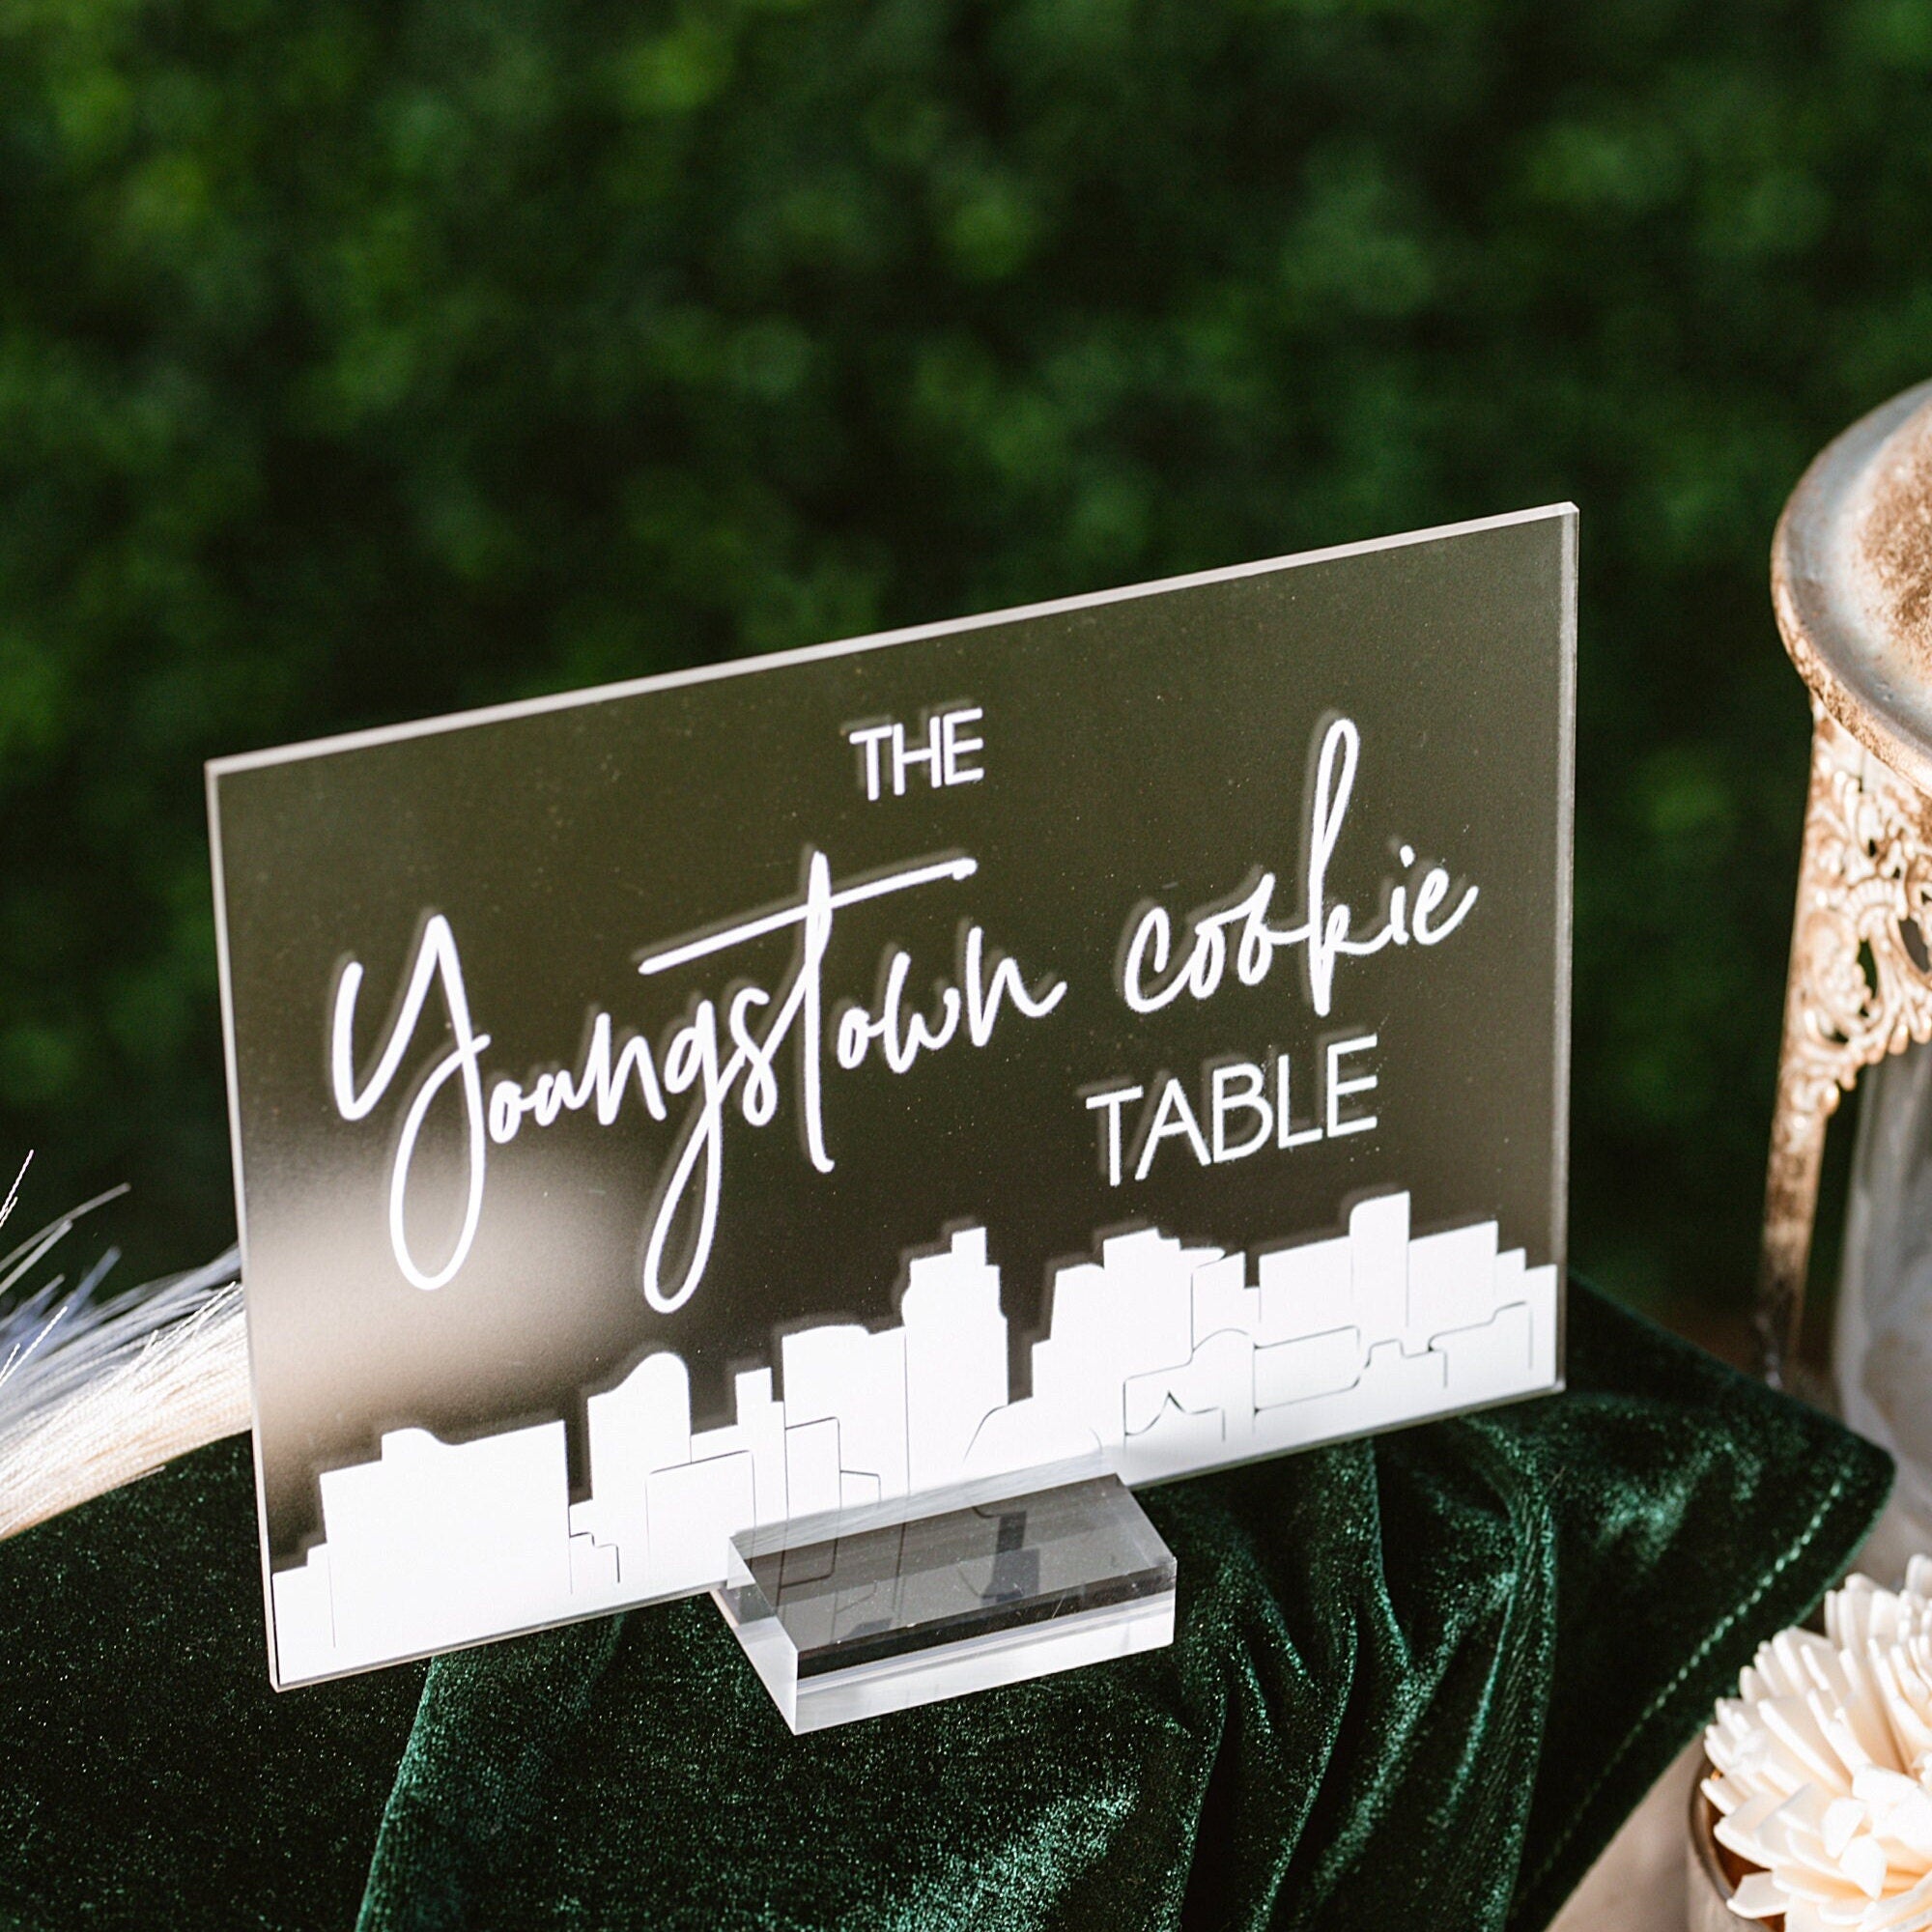 Youngstown Cookie Table Tradition Favors Clear Glass Look Acrylic Wedding Sign All of Yinz Skyline Lucite Perspex Cookies Table Sign